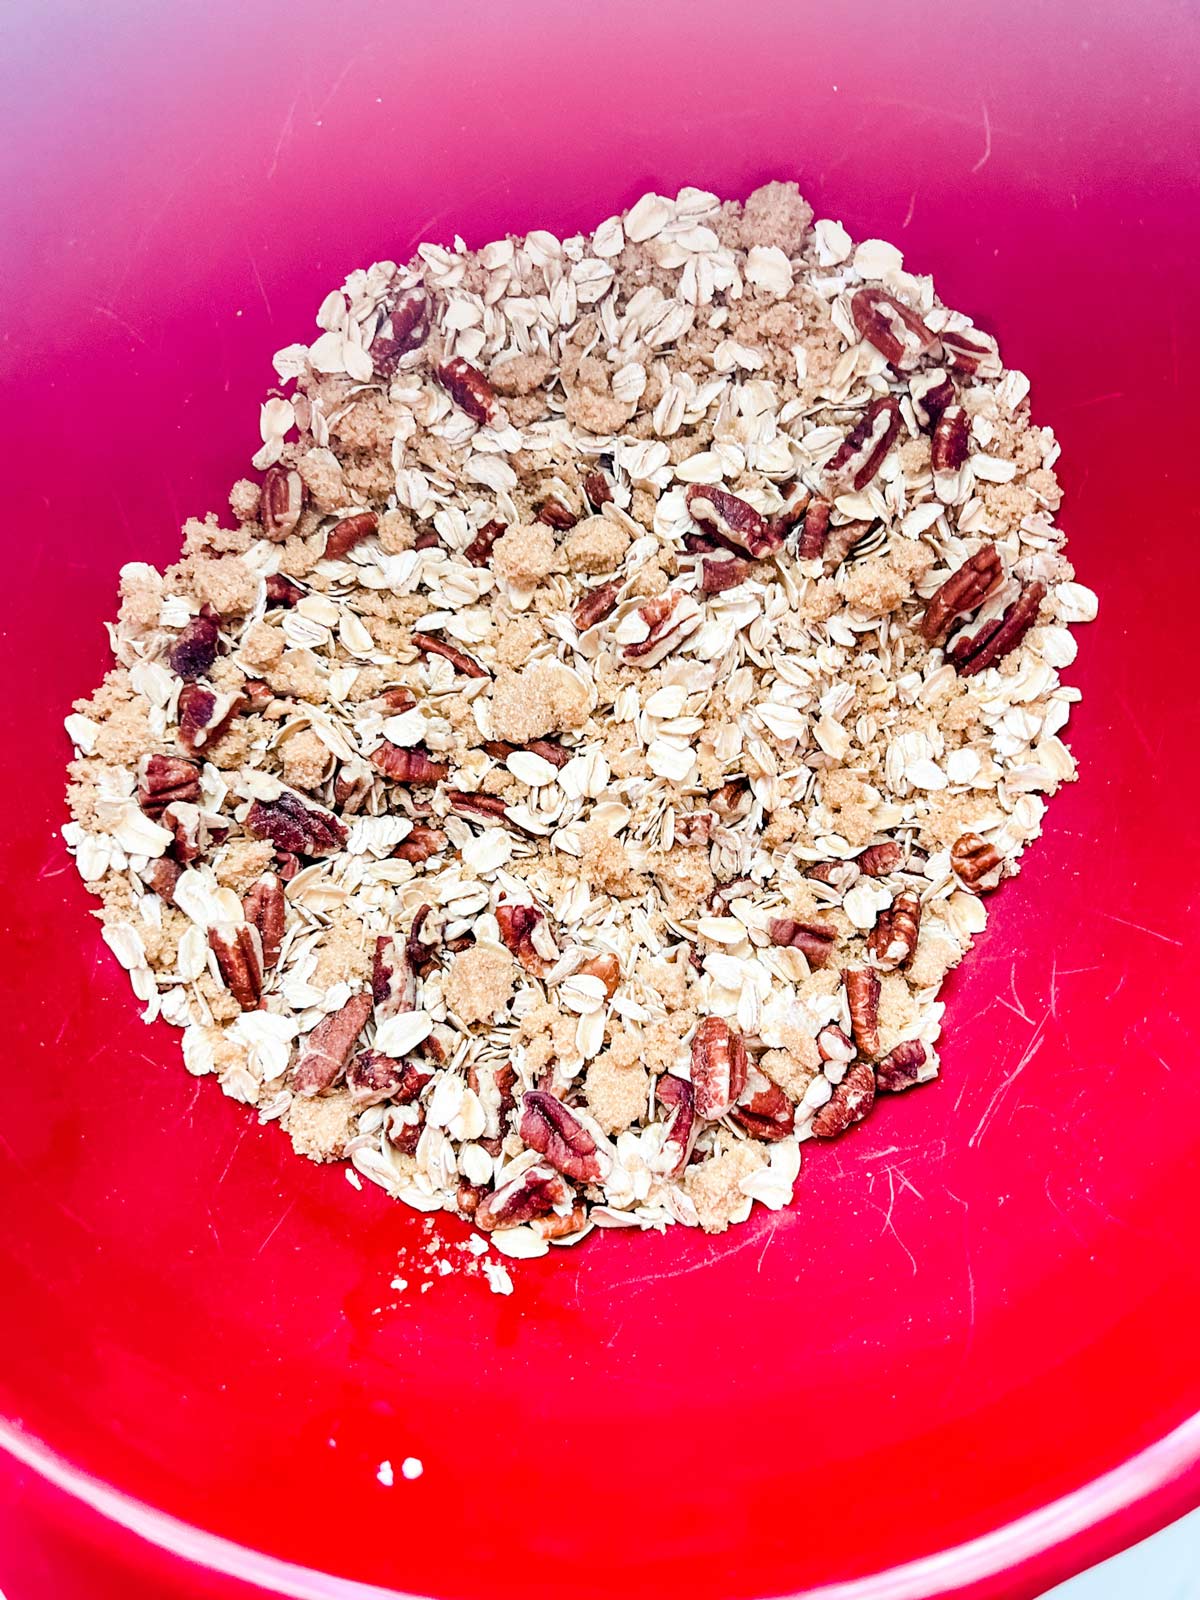 Oats, brown sugar, and pecans in a red bowl